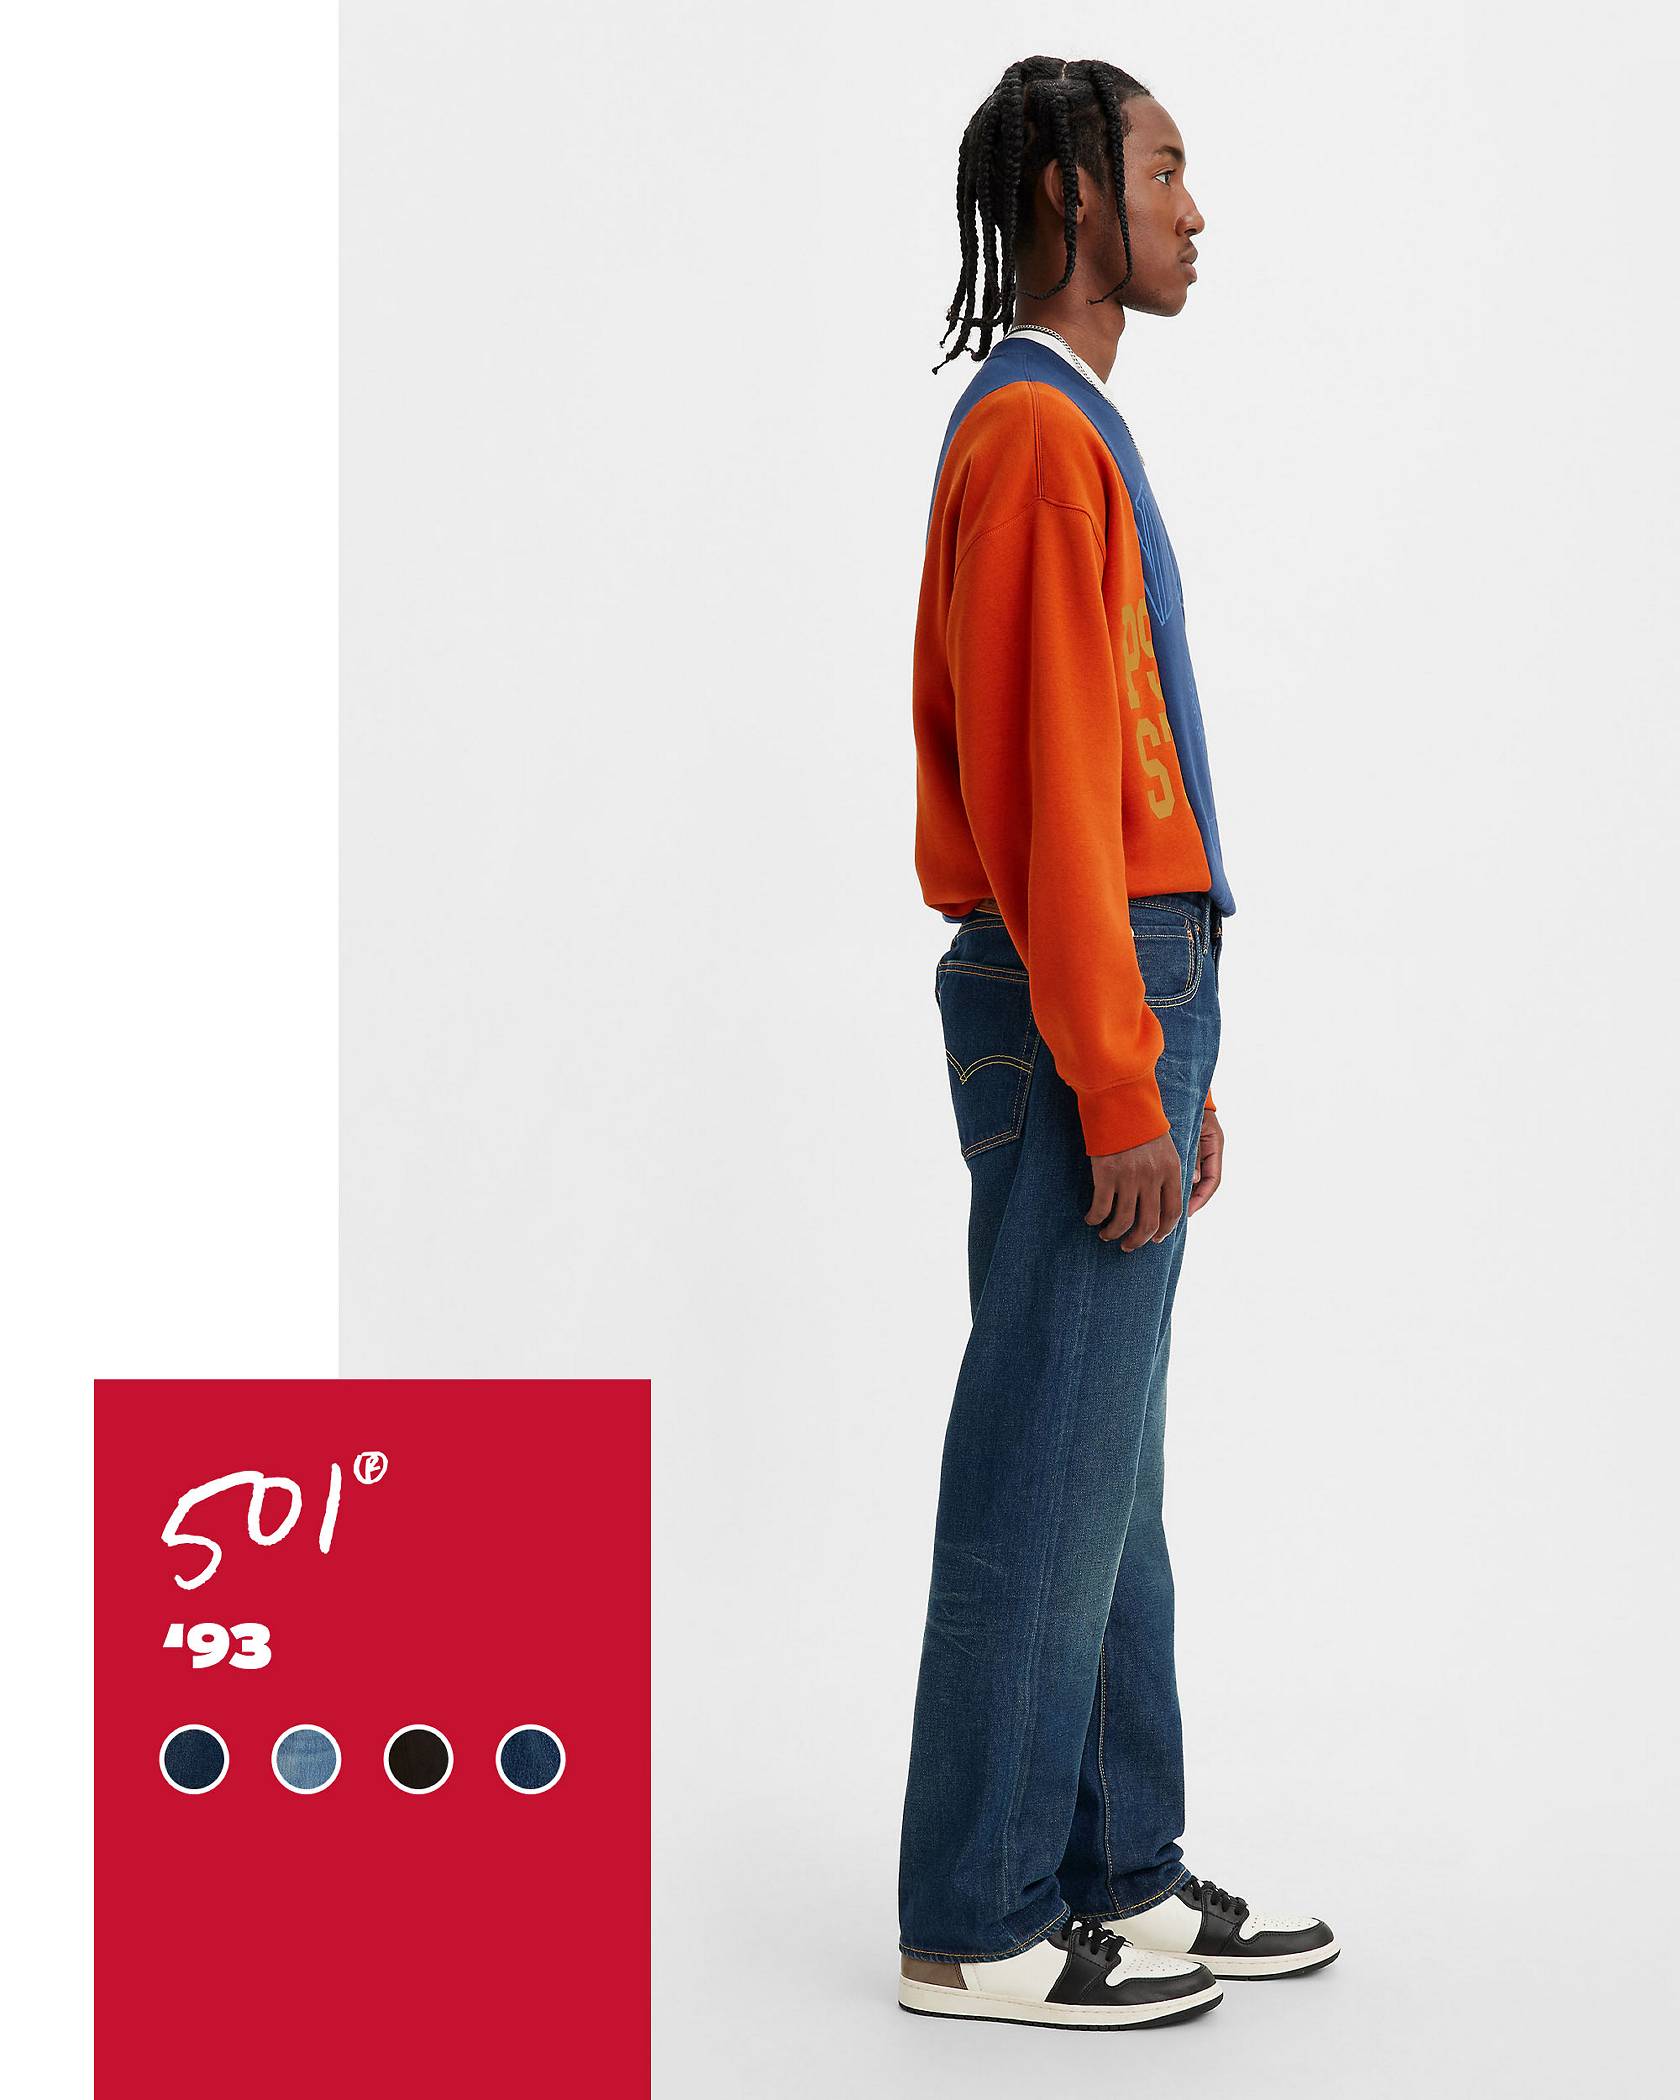 Paneled shot of model in dark wash 501® '93 jeans with a red tag displaying product name and sample color swatches